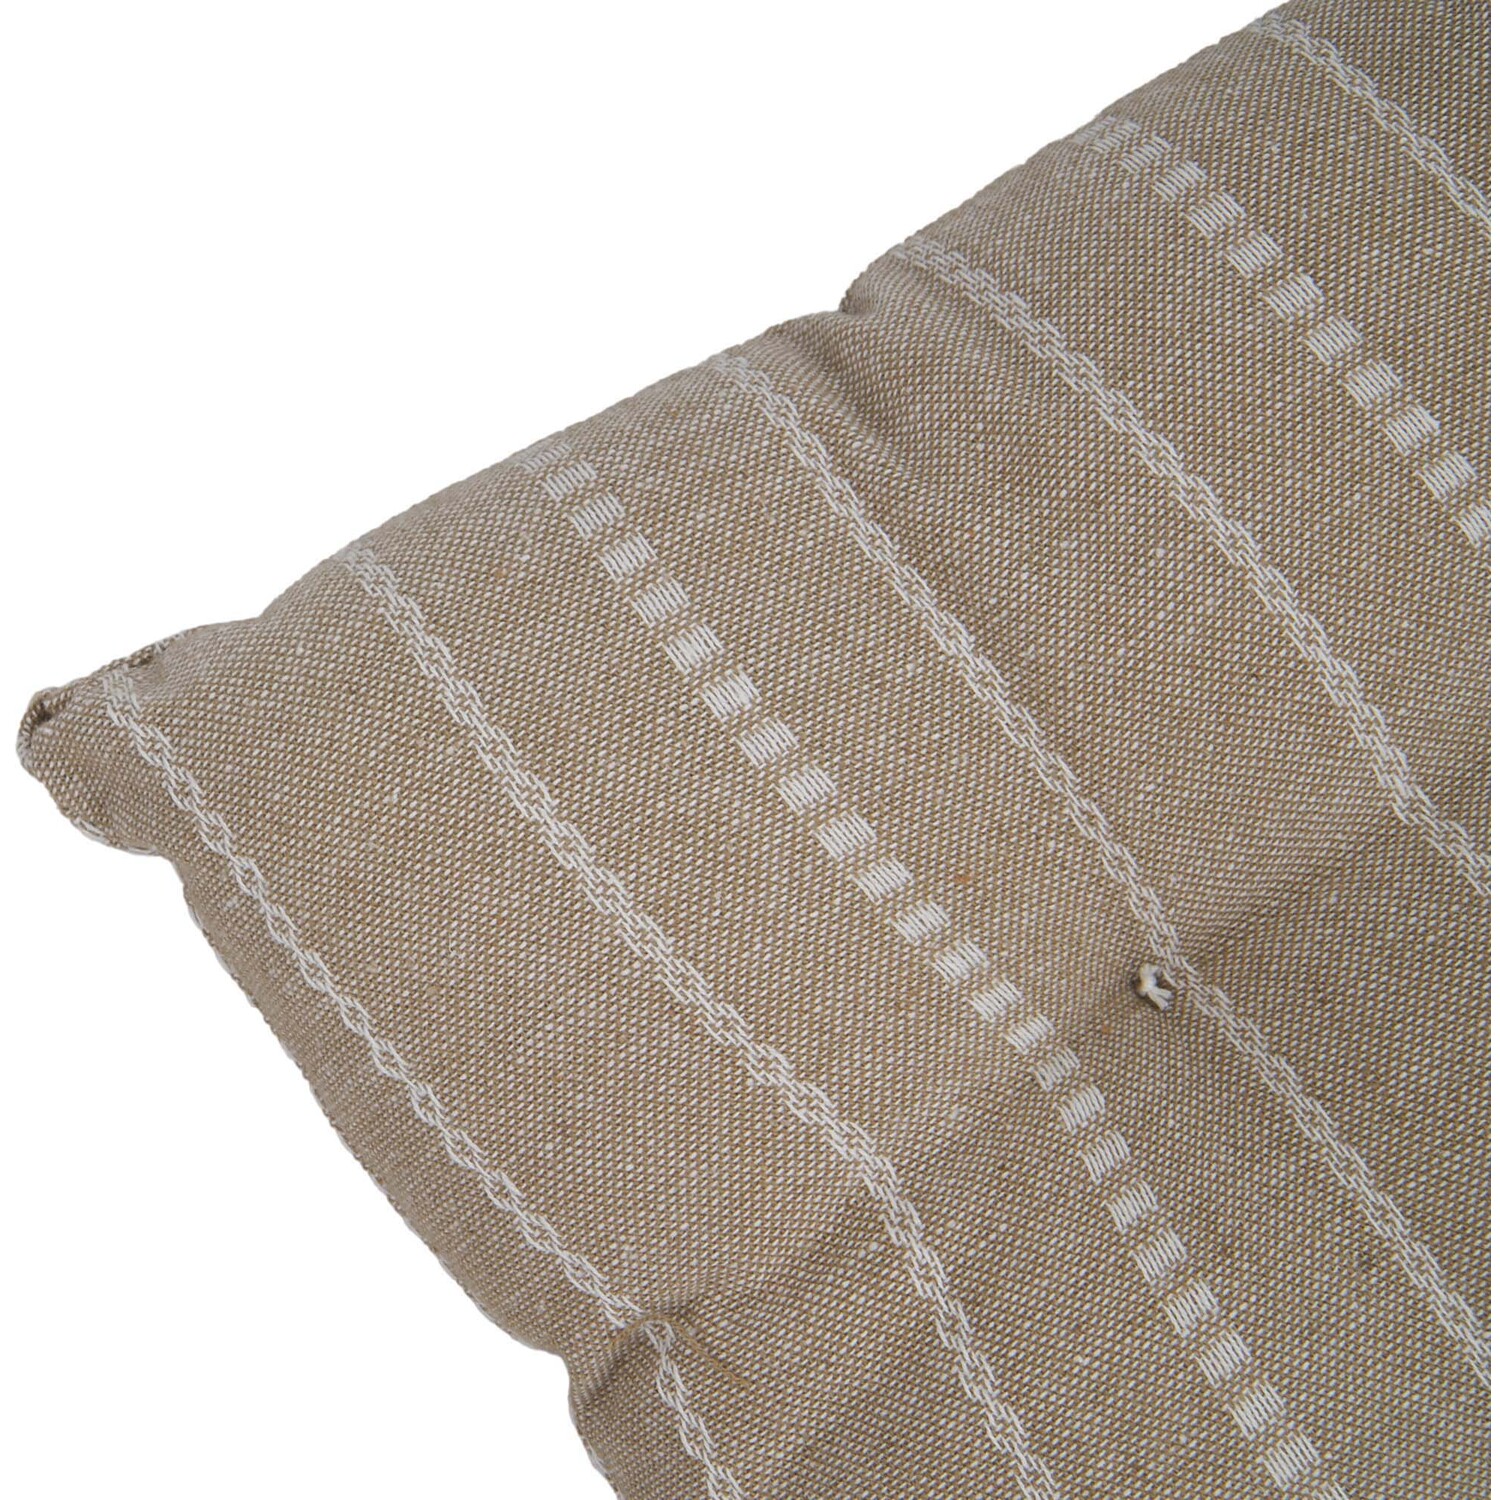 Brown Woven Seat Pad 40 x 40cm Image 4